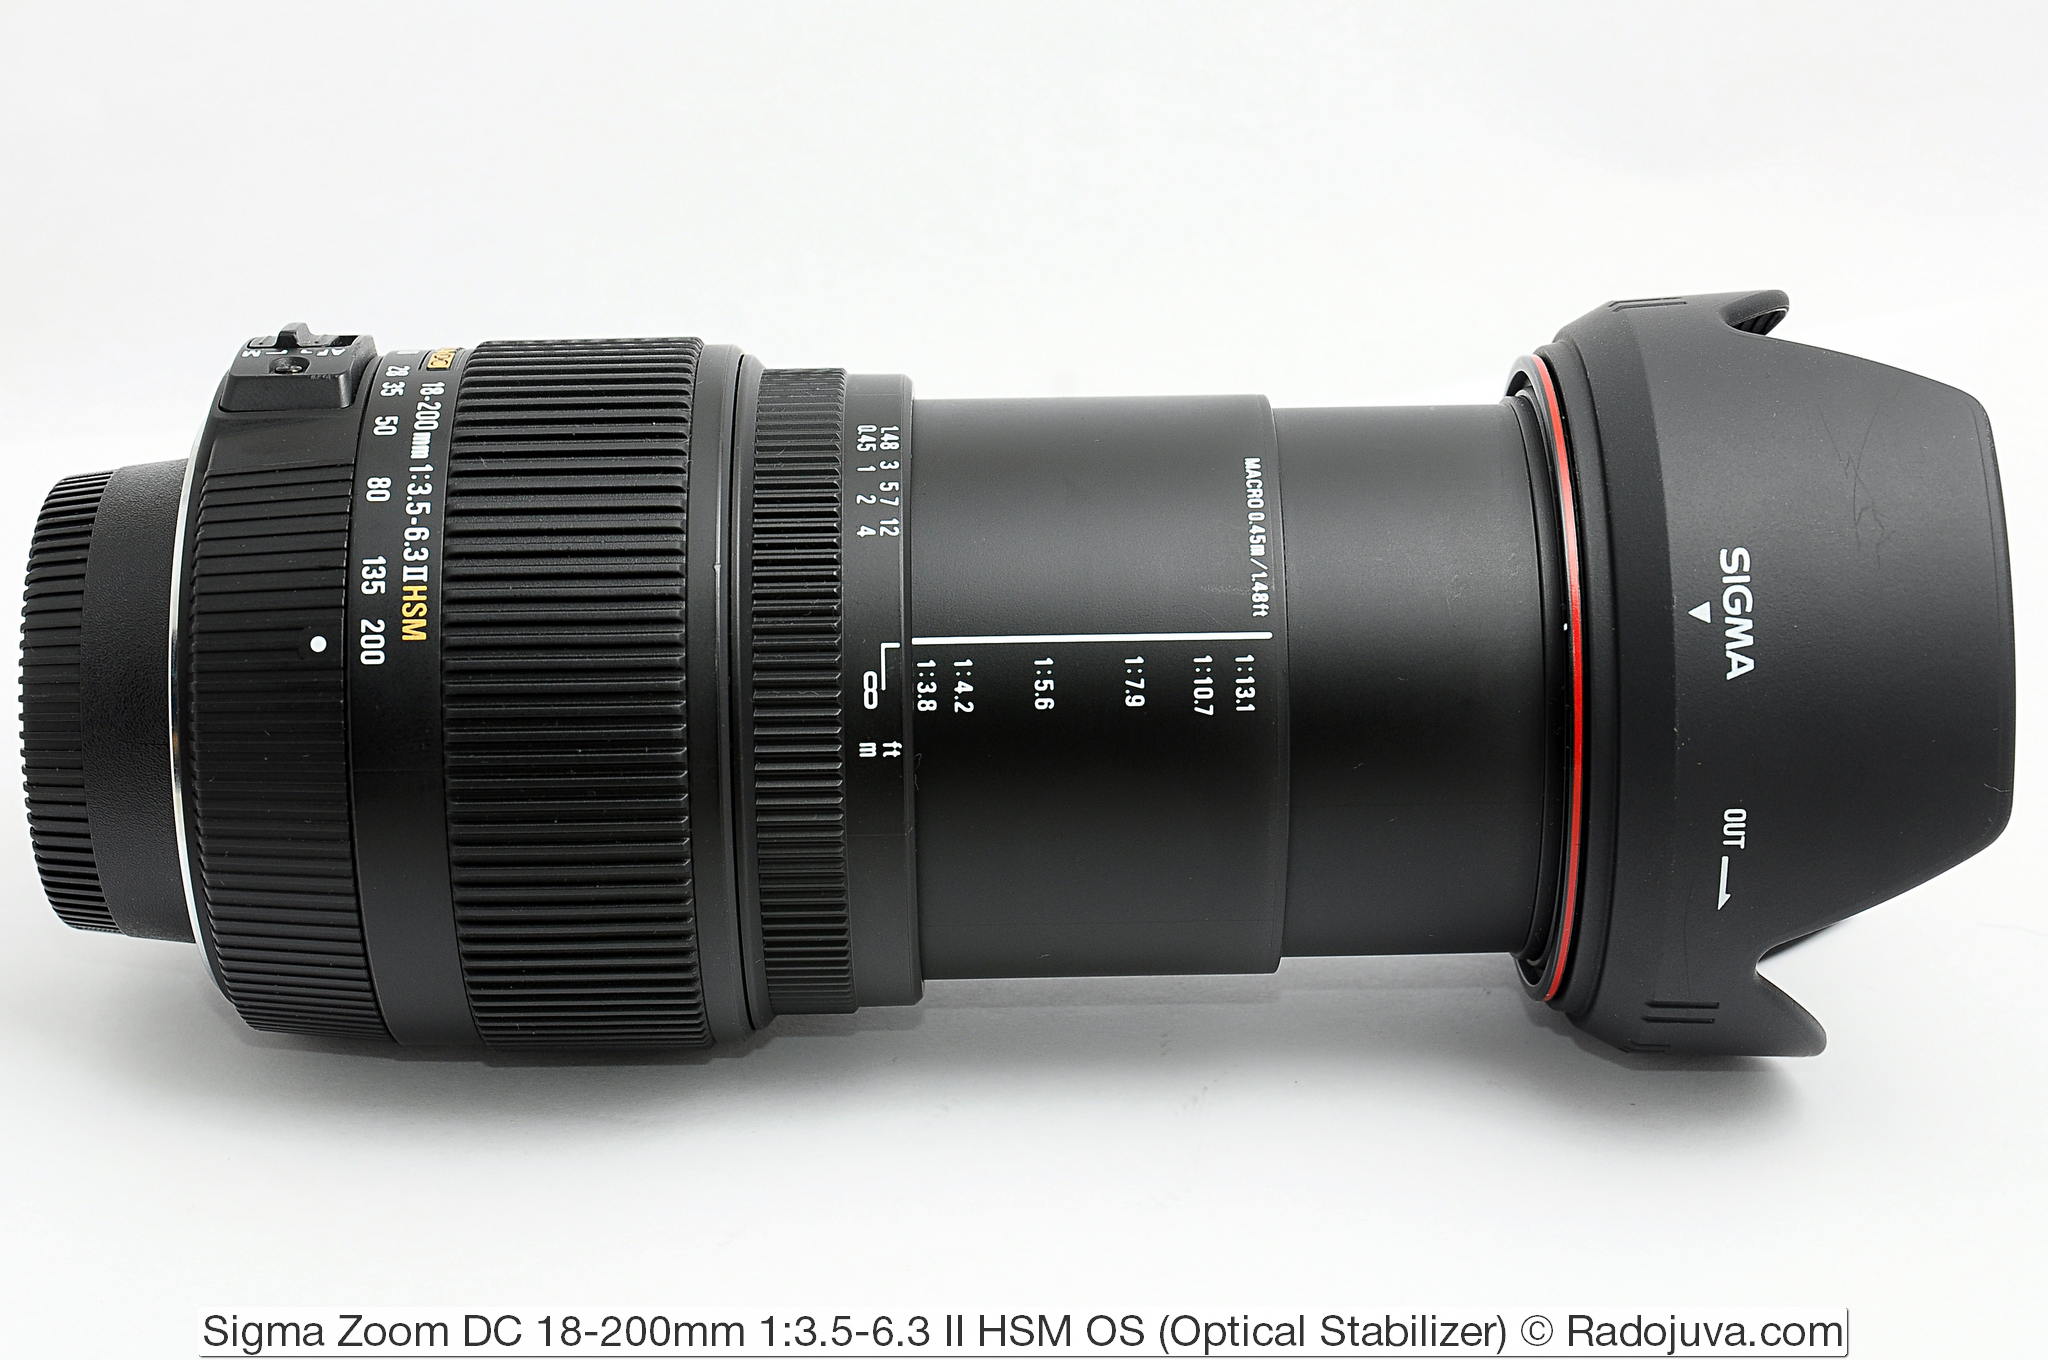 Review Sigma Zoom DC 18-200mm 1: 3.5-6.3 II HSM OS | Happy